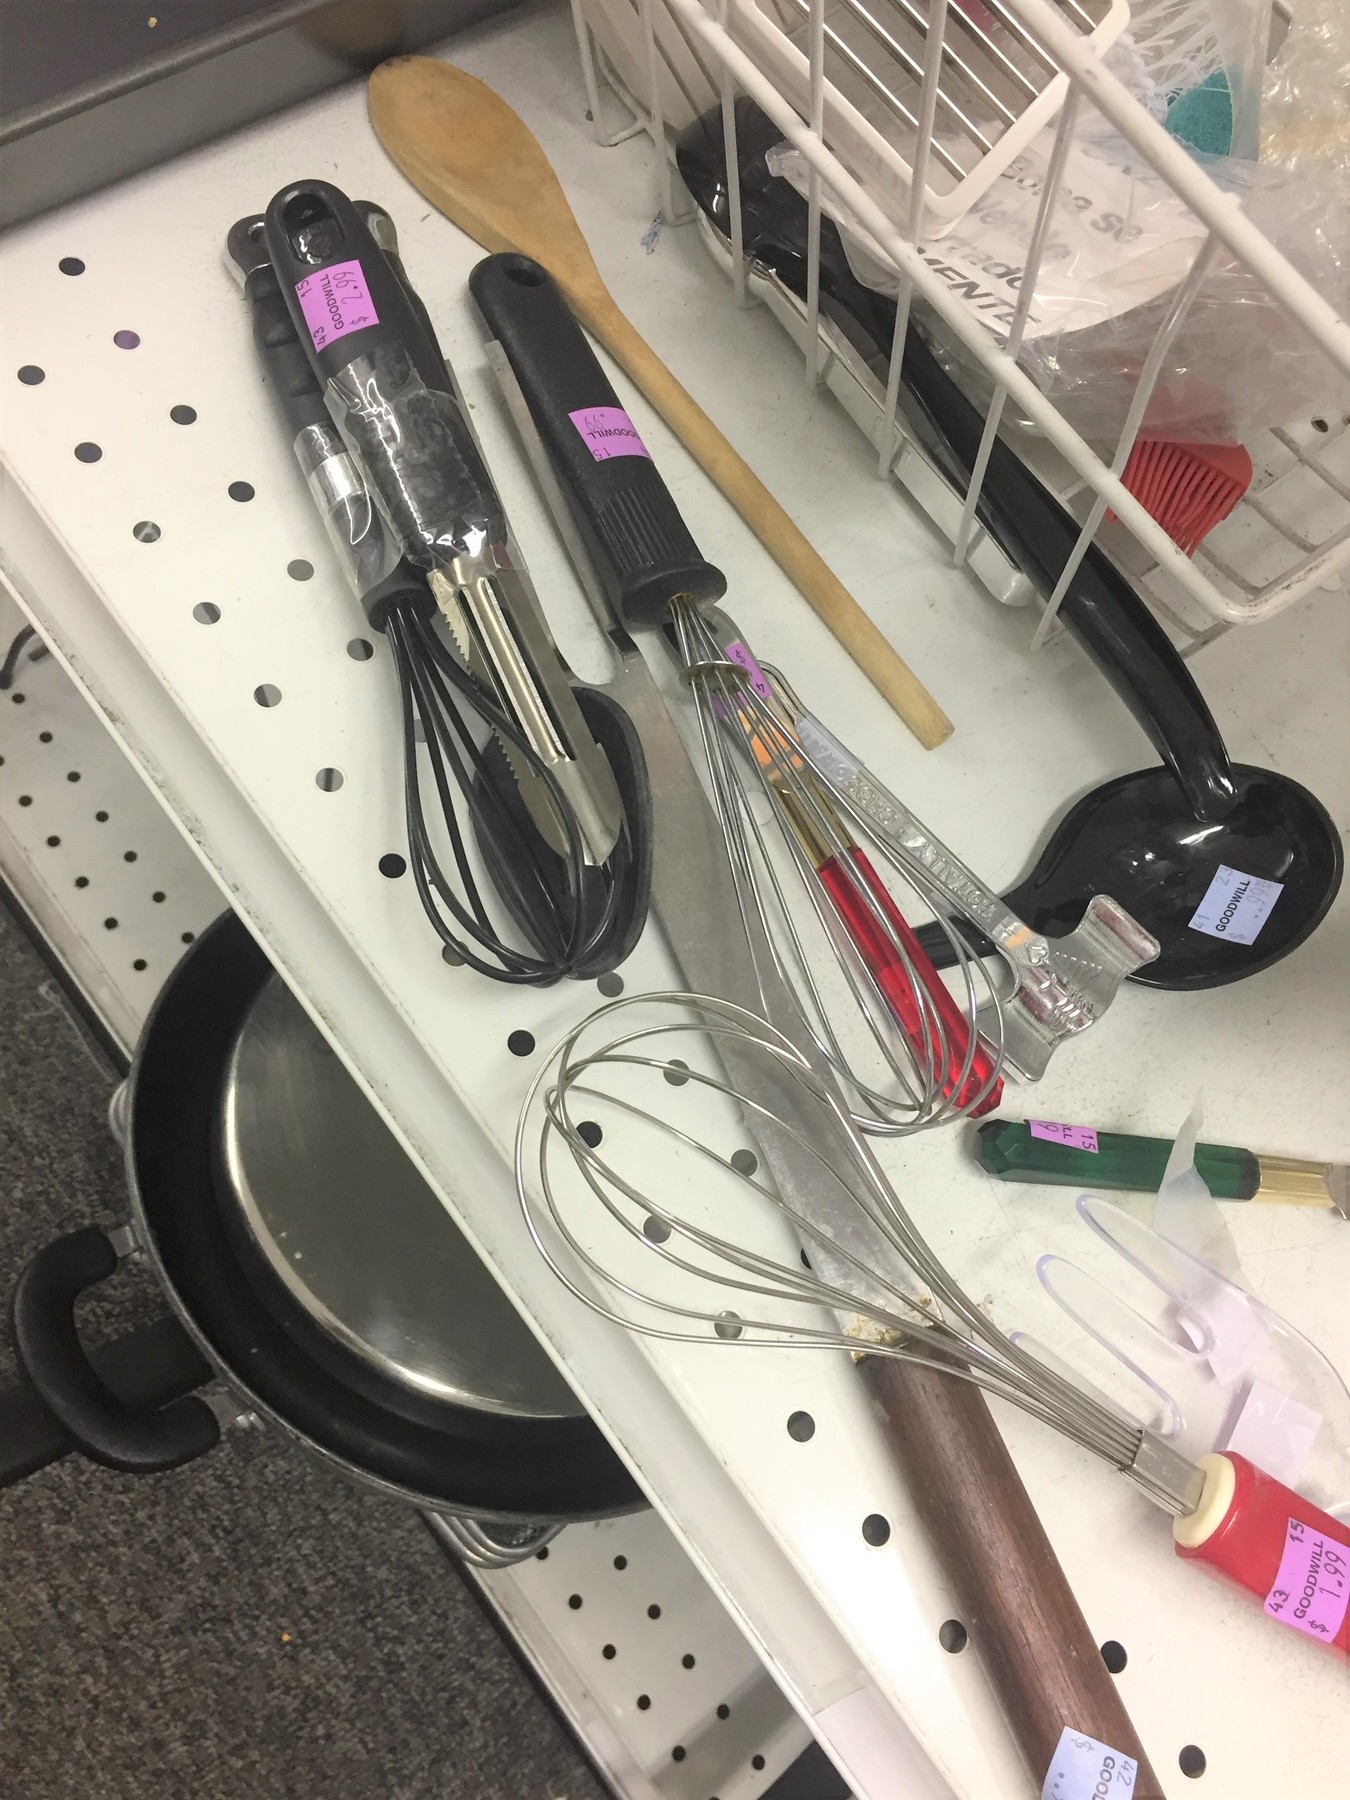 Cooking utensils found at Goodwill